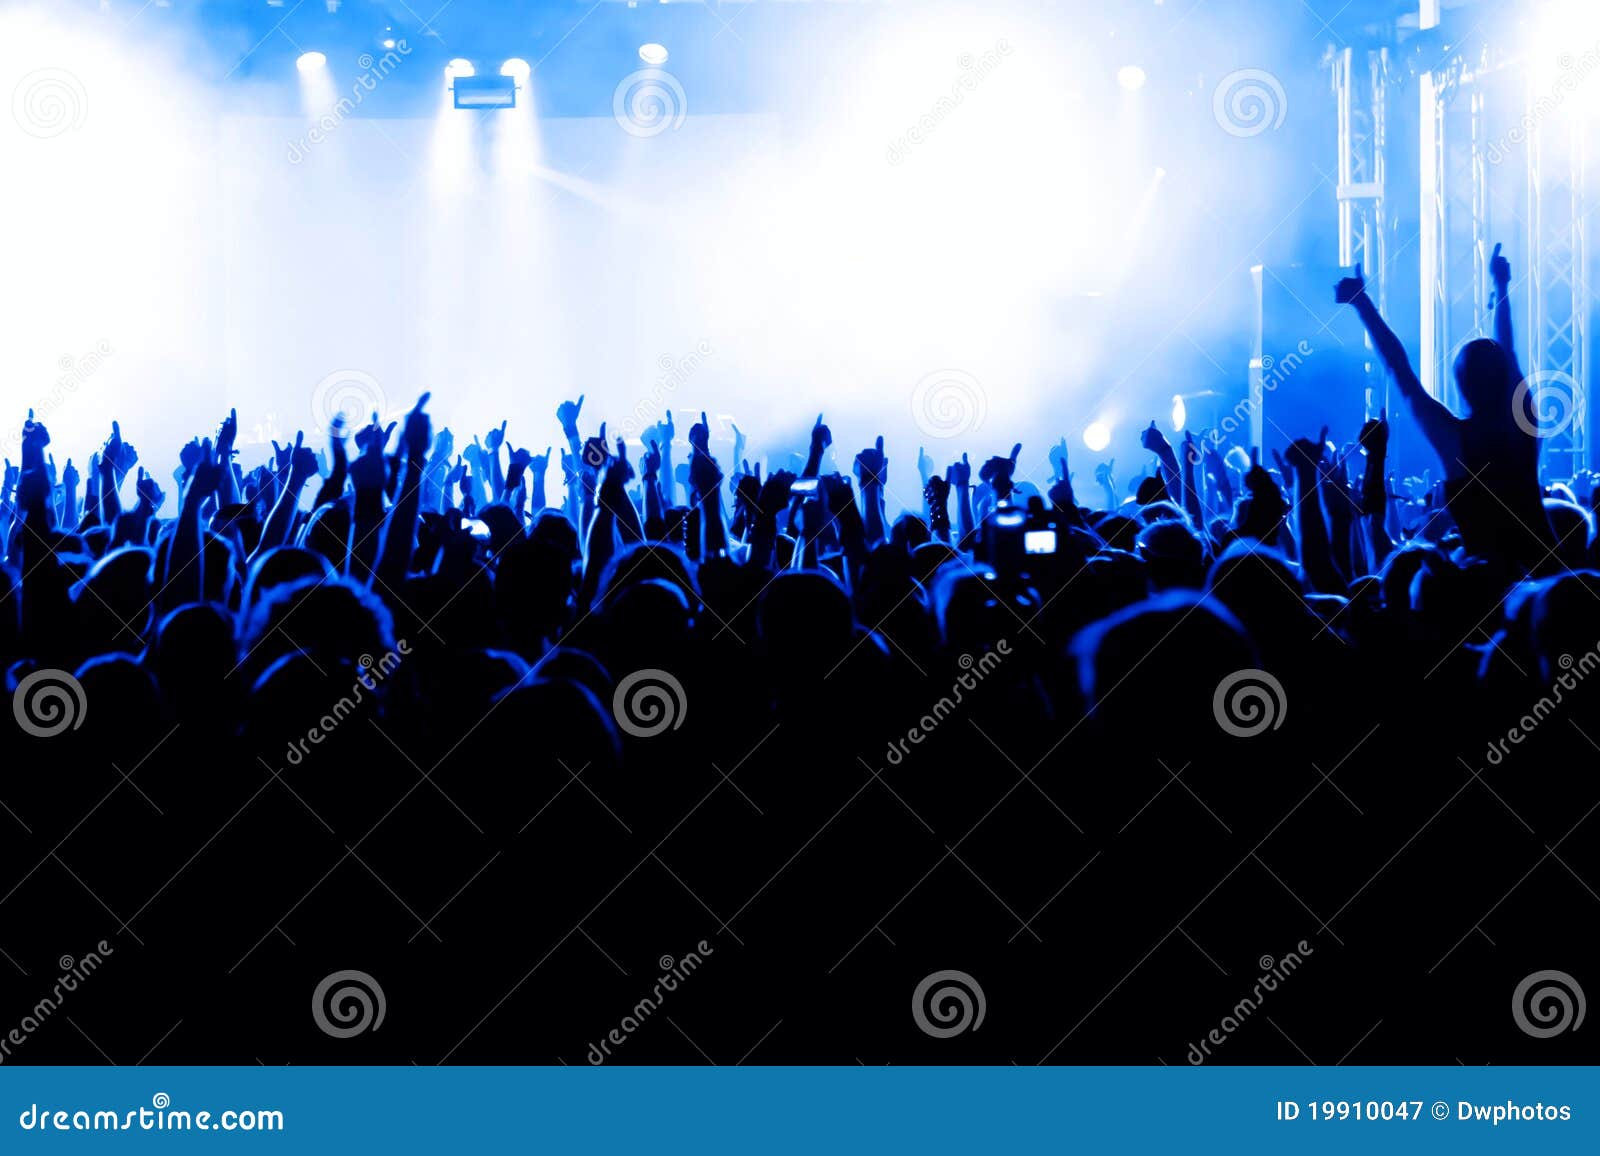 music audience clipart - photo #21